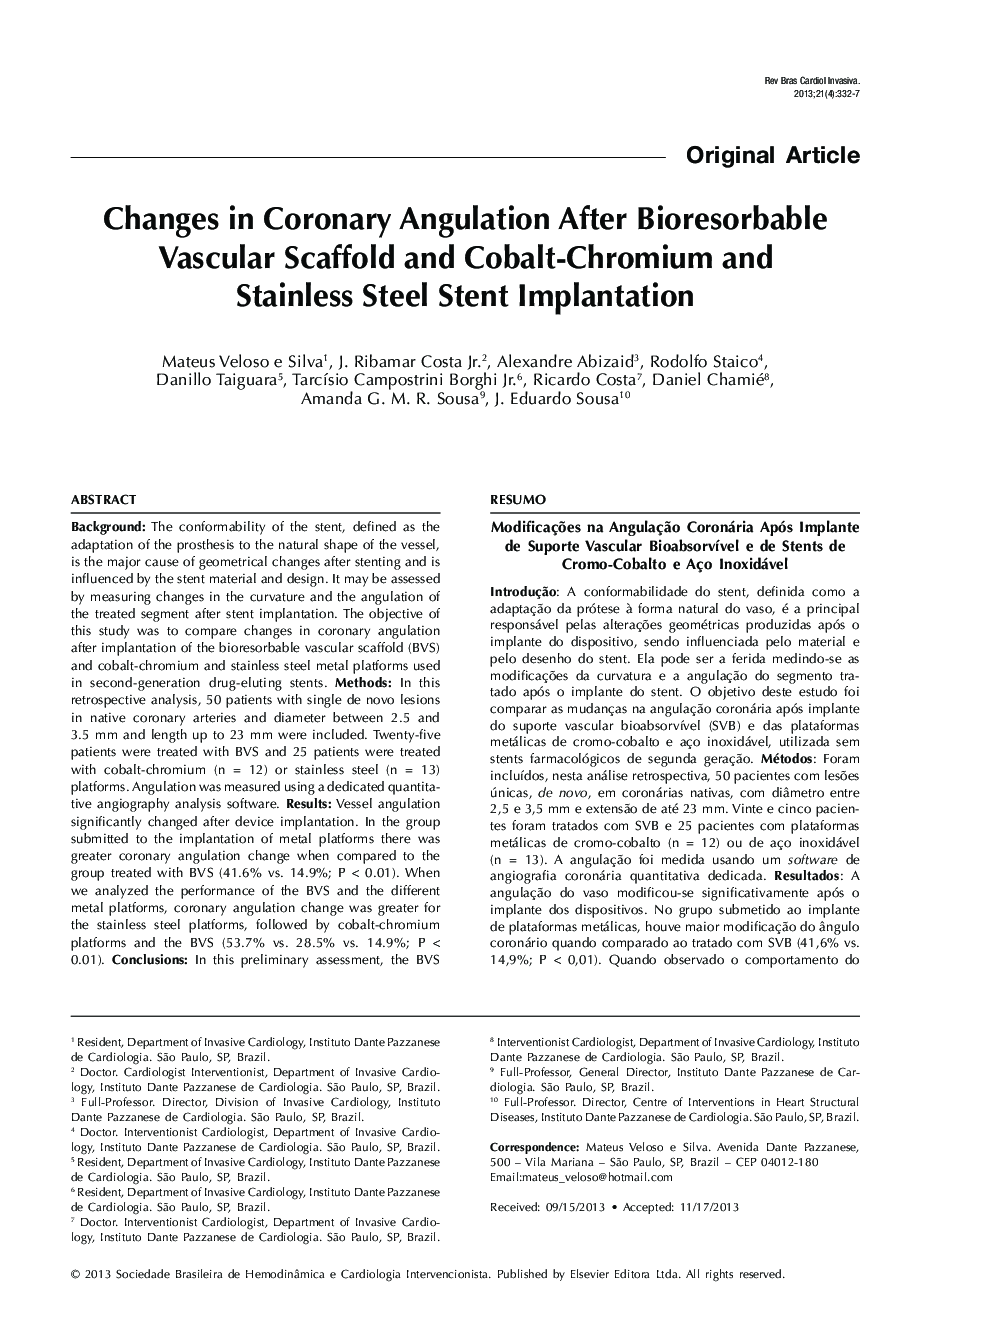 Changes in Coronary Angulation After Bioresorbable Vascular Scaffold and Cobalt-Chromium and Stainless Steel Stent Implantation